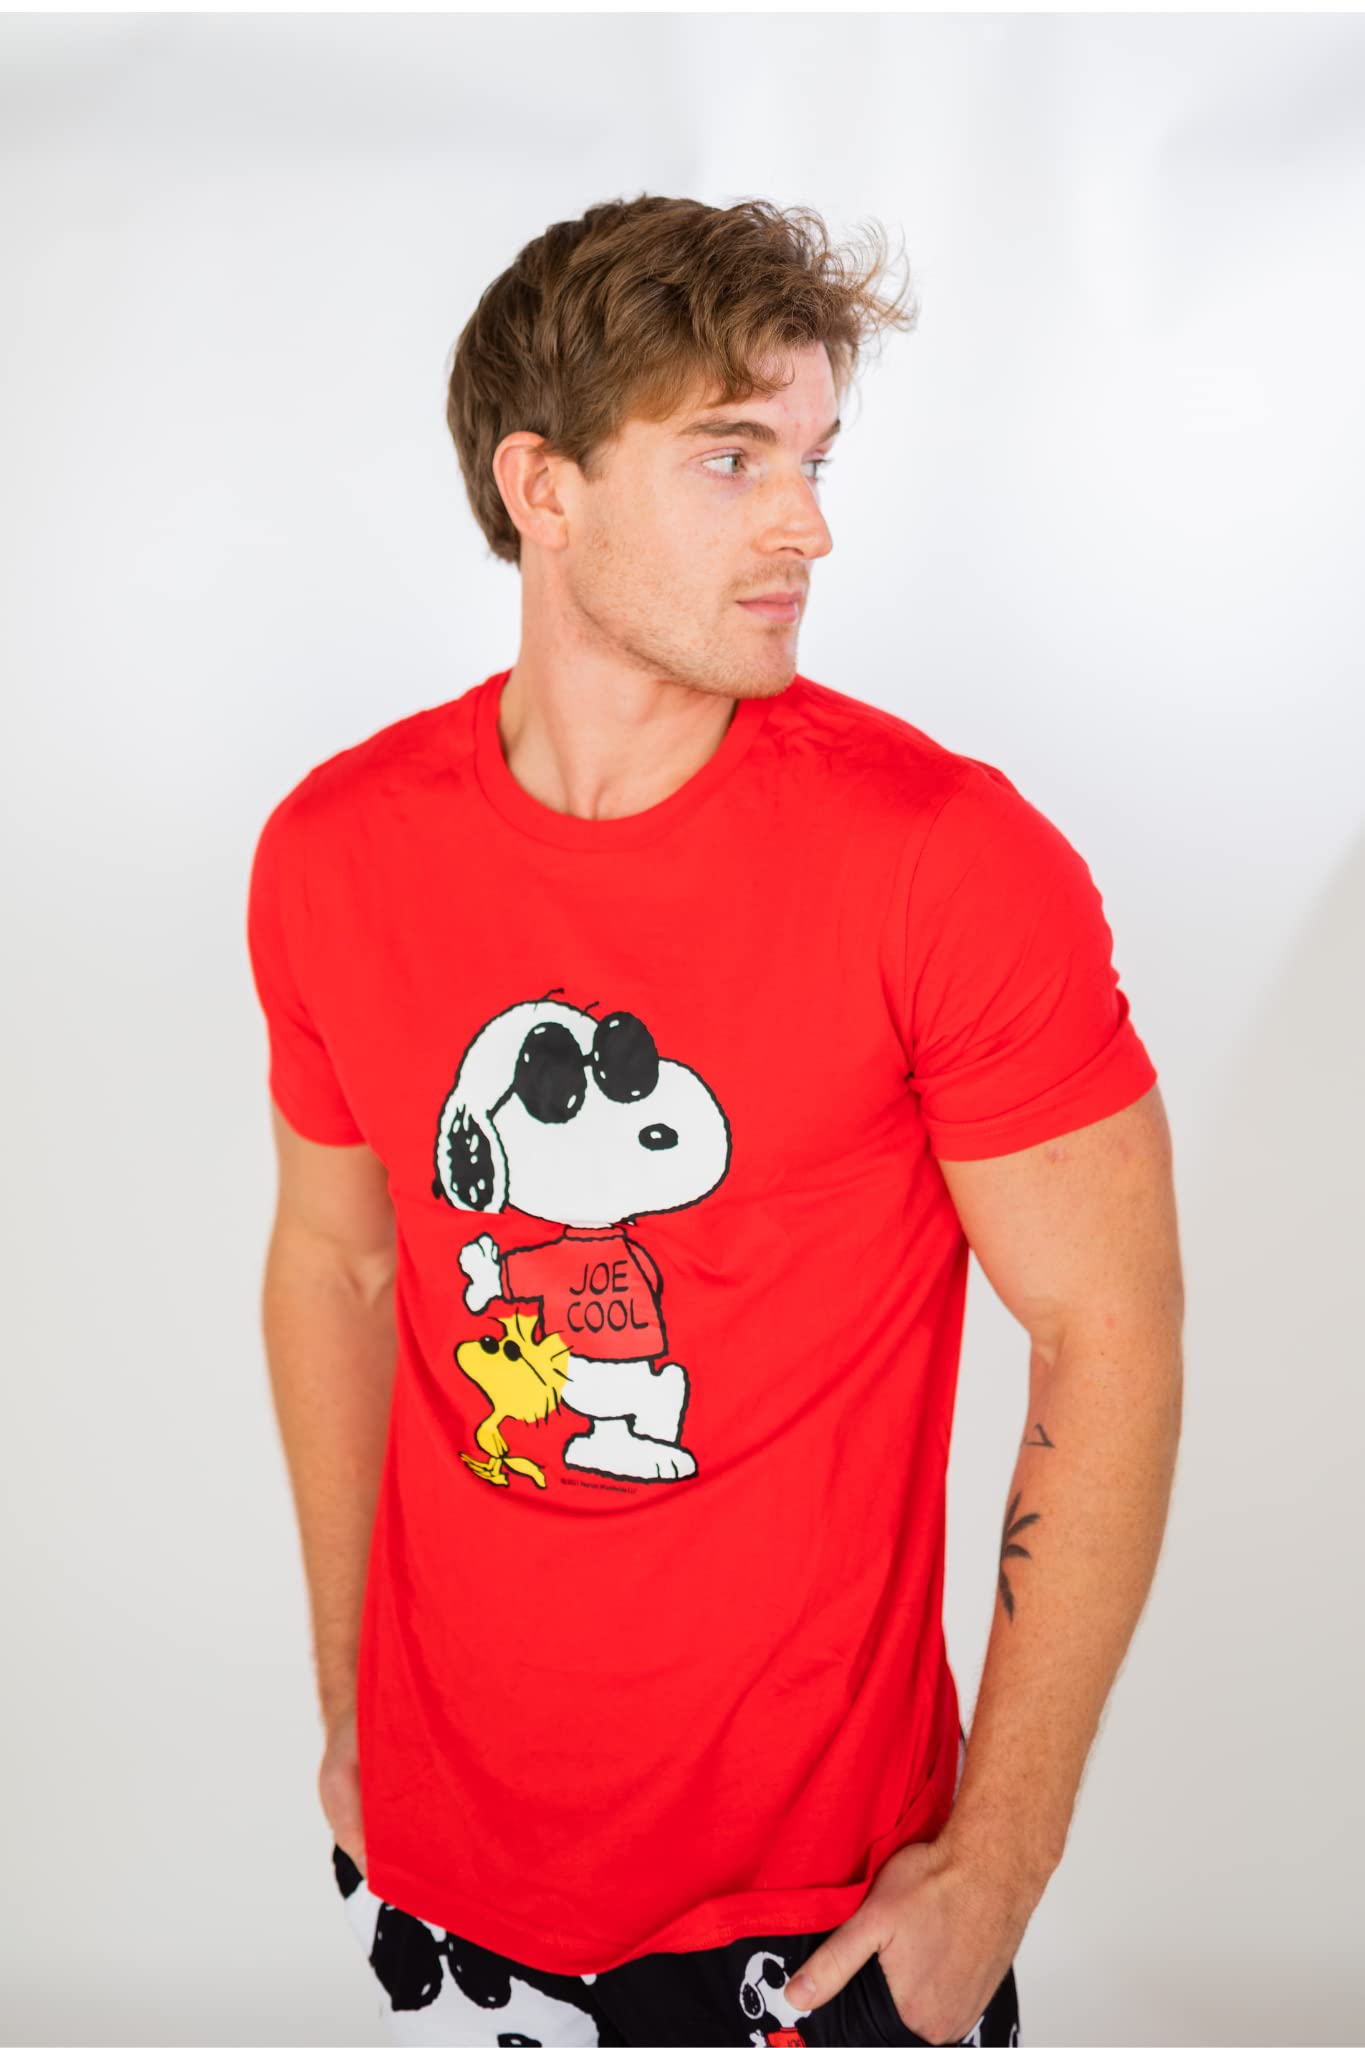 Image of male model standing and looking off into the distance wearing Peanuts Snoopy Joe Cool short sleeve T-shirt (front view white background)